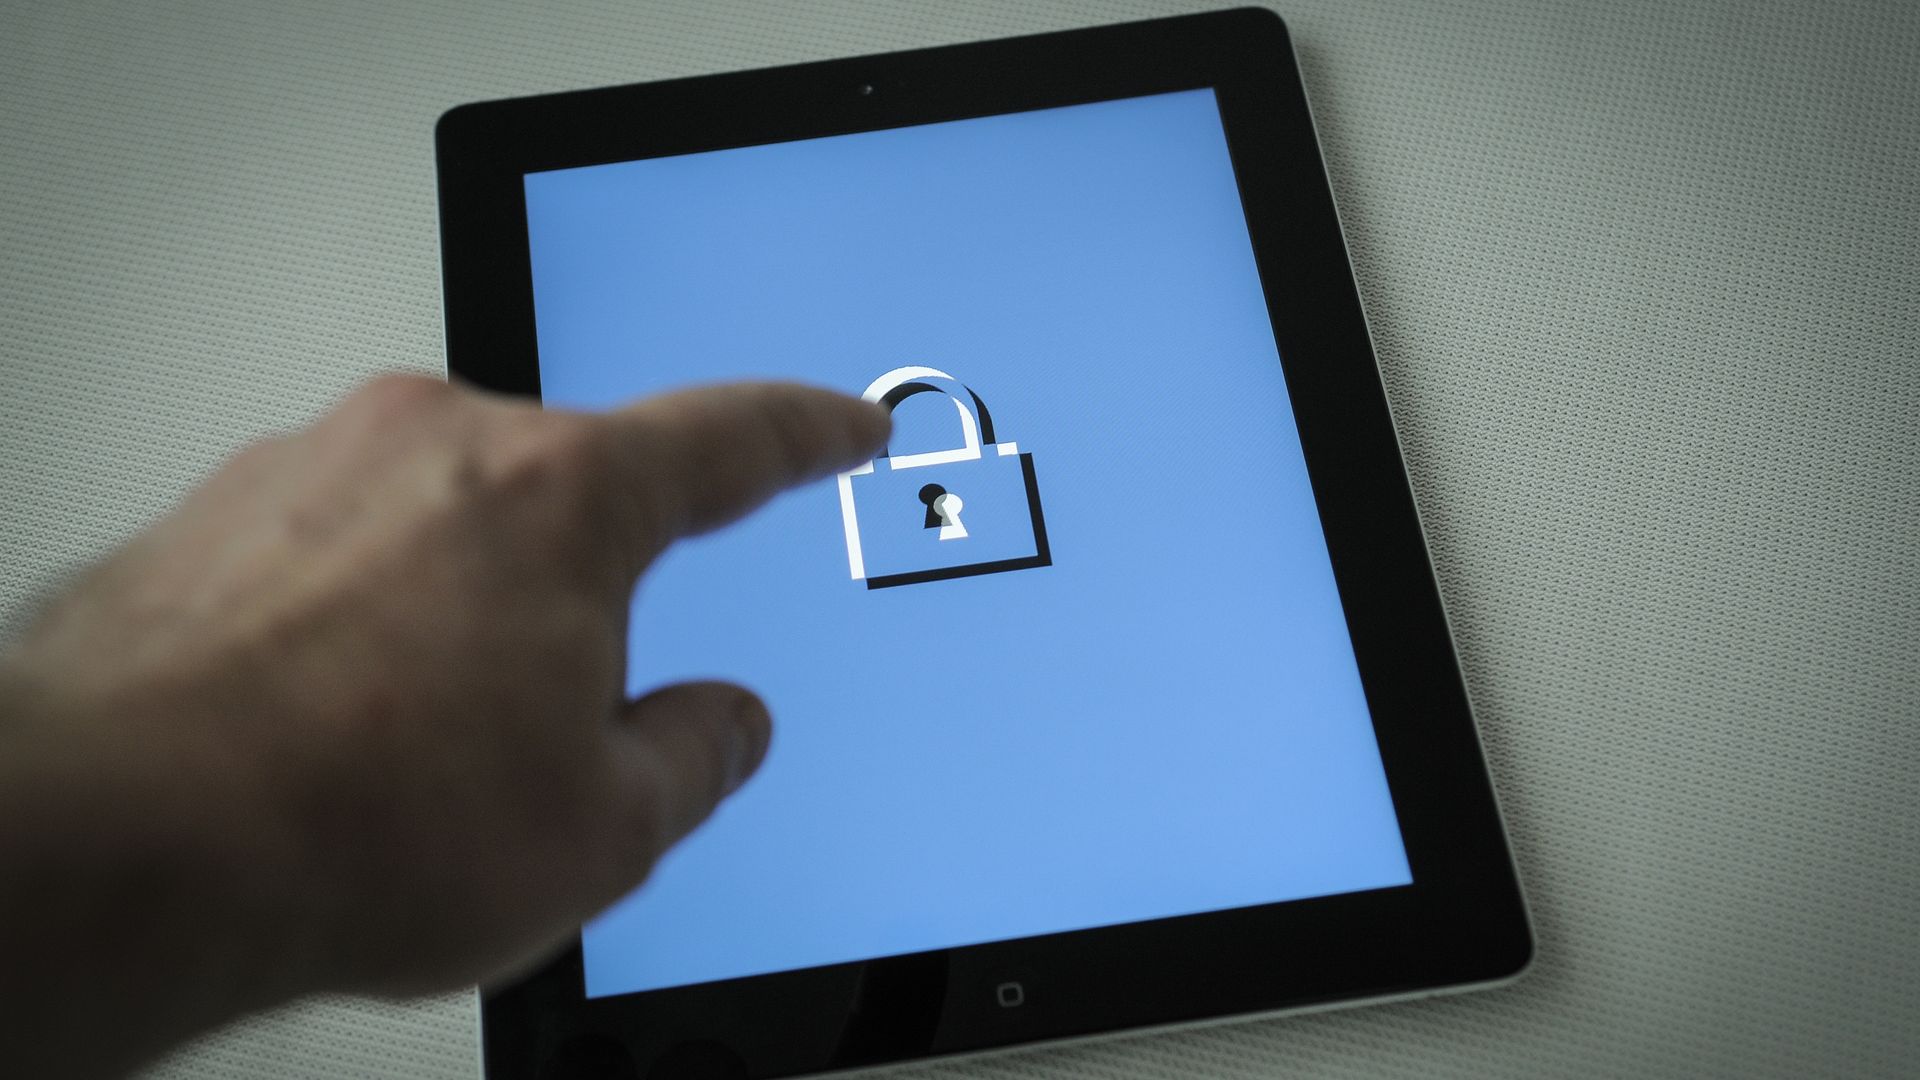 Finger pointing at a lock illustration on a tablet